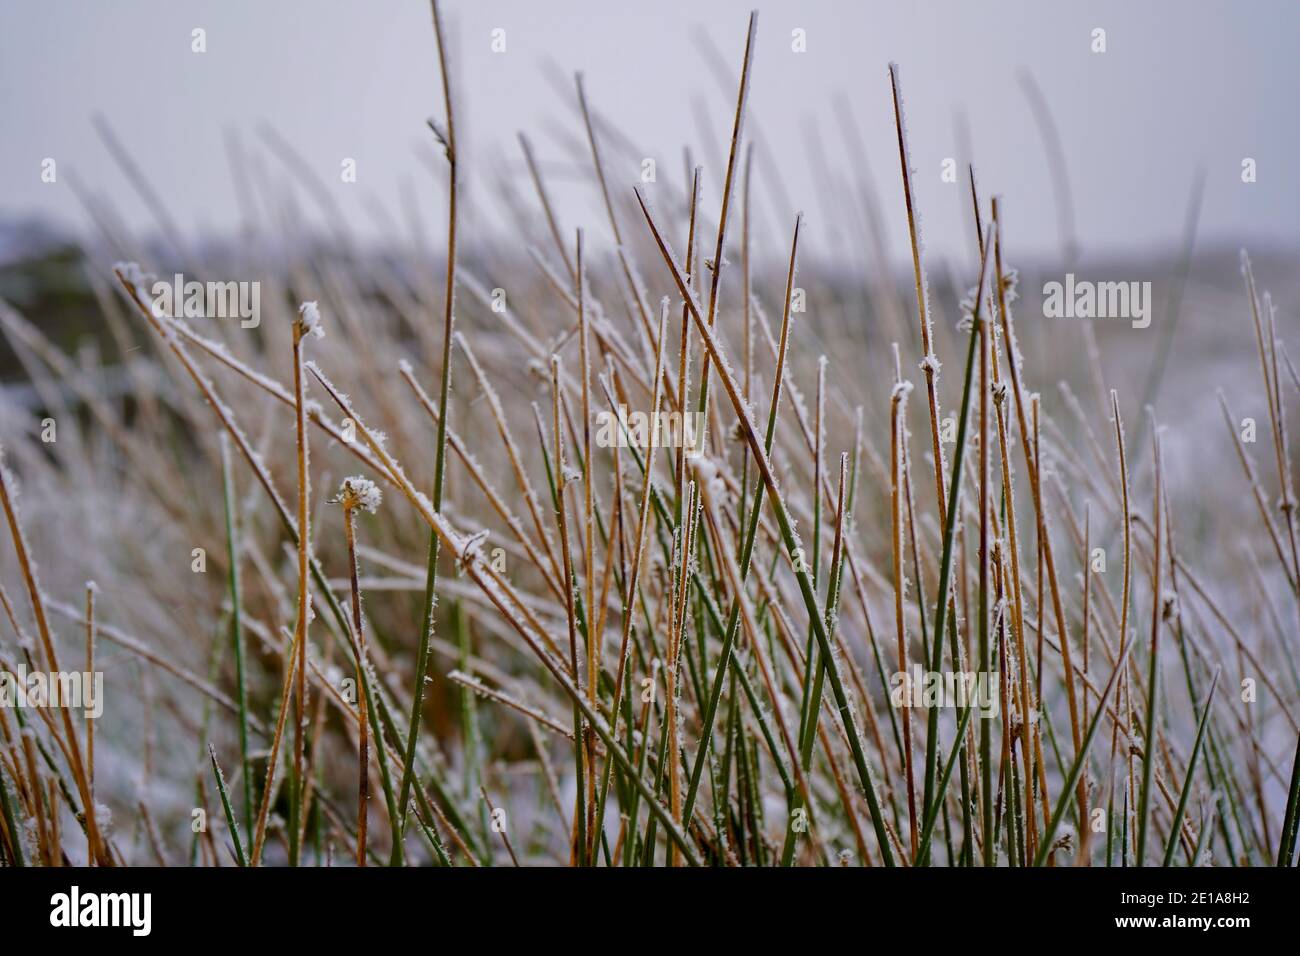 Closeup of long grass in the snow Stock Photo